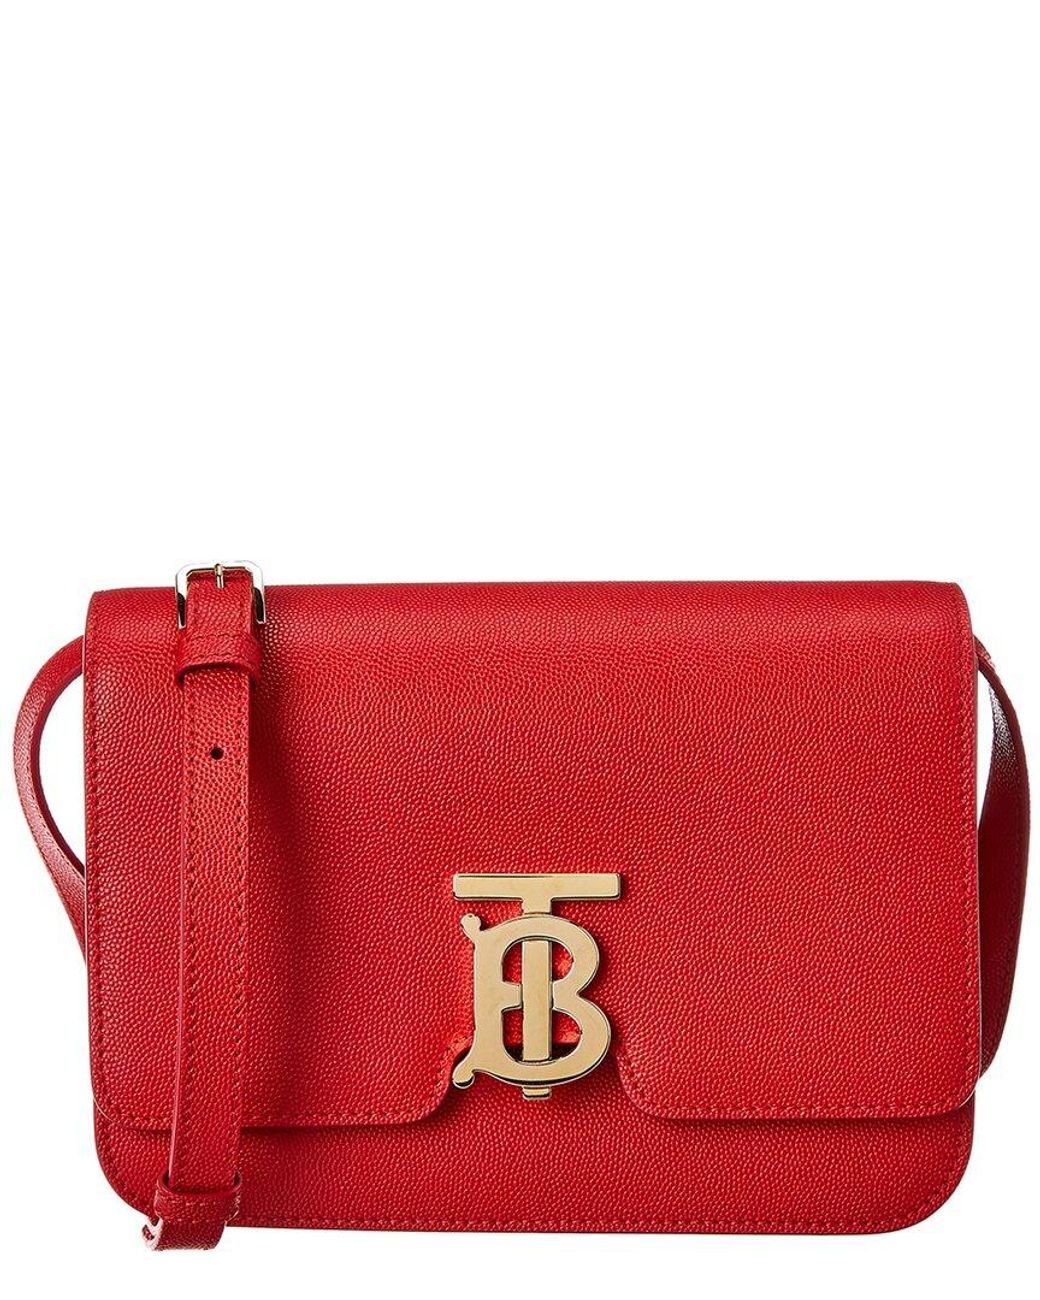 Burberry Small Tb Leather Shoulder Bag in Red - Save 17% - Lyst